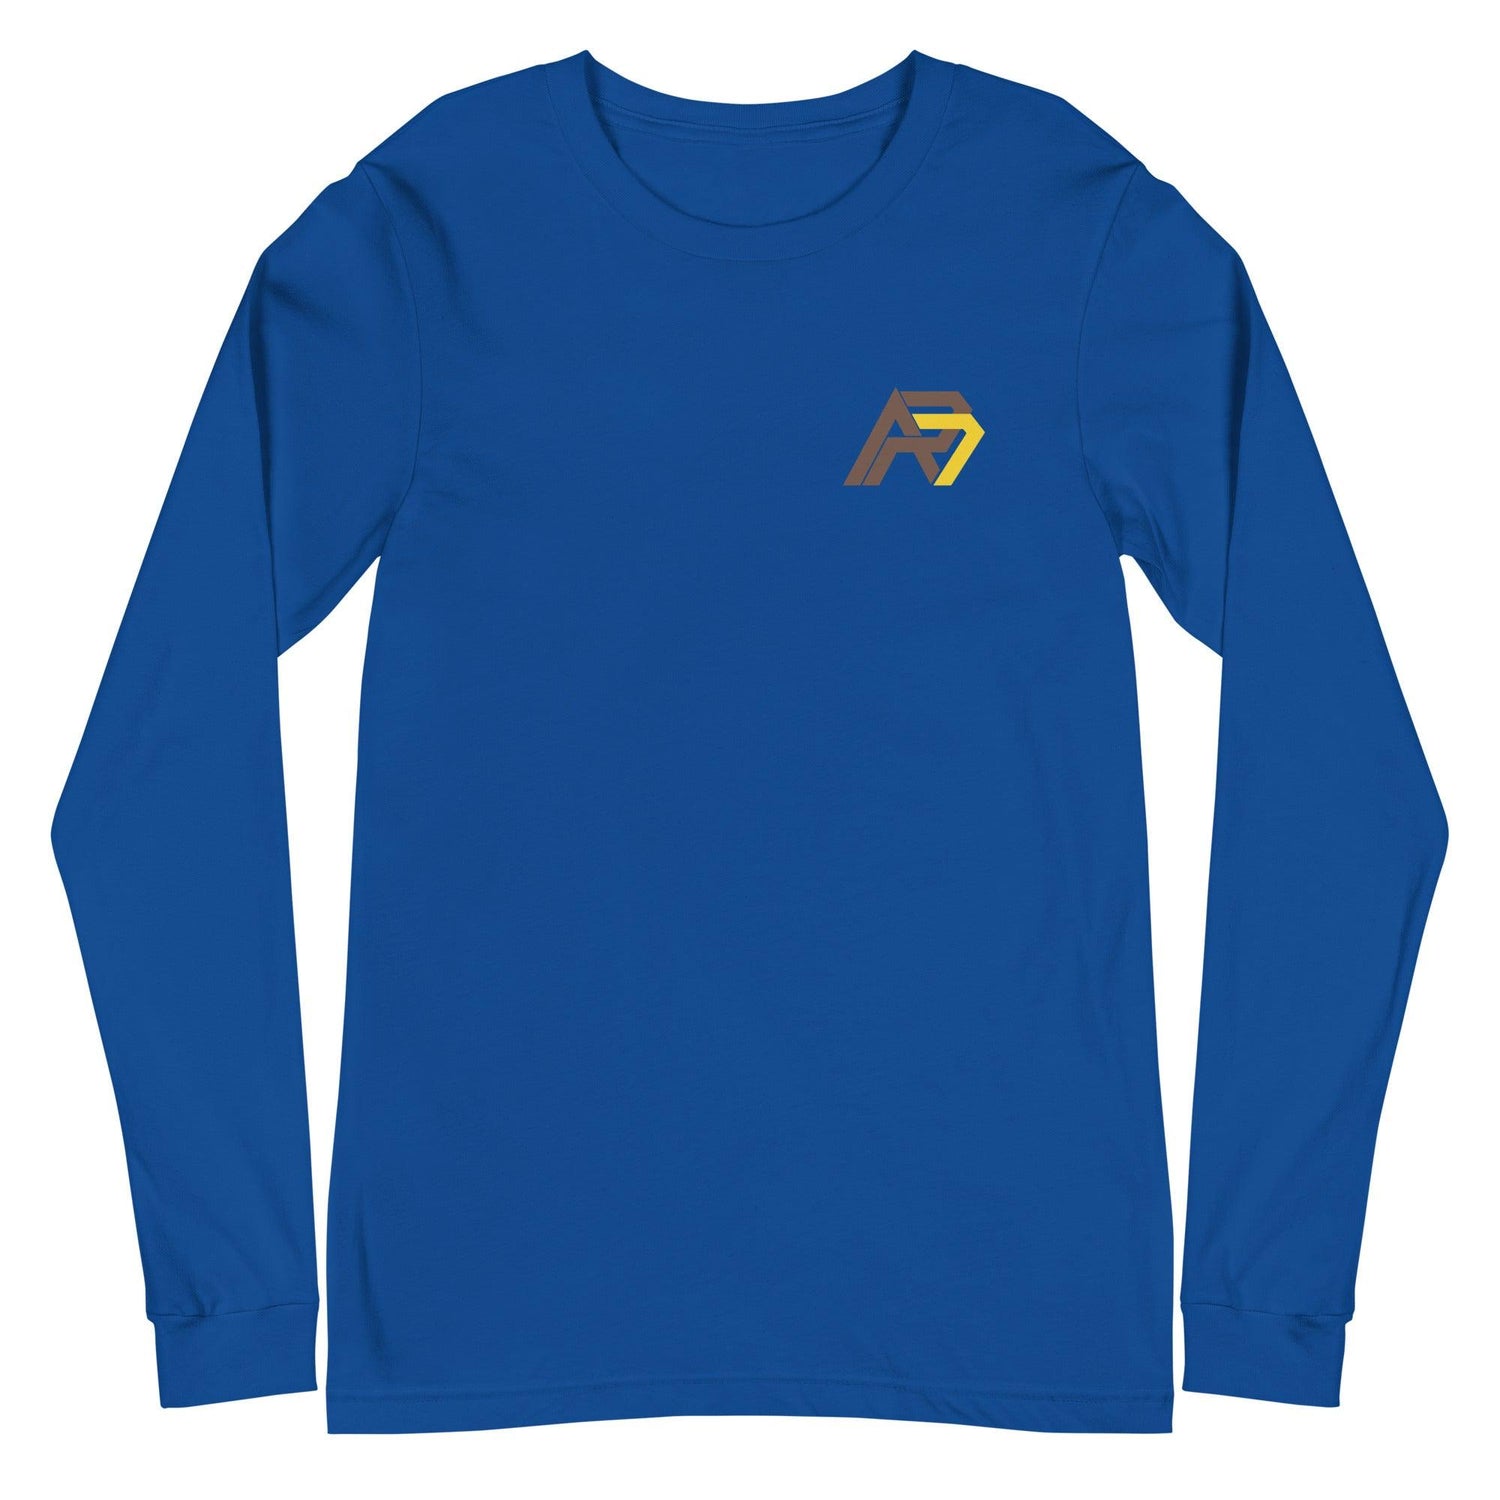 Anthony Romphf "Essential" Long Sleeve Tee - Fan Arch